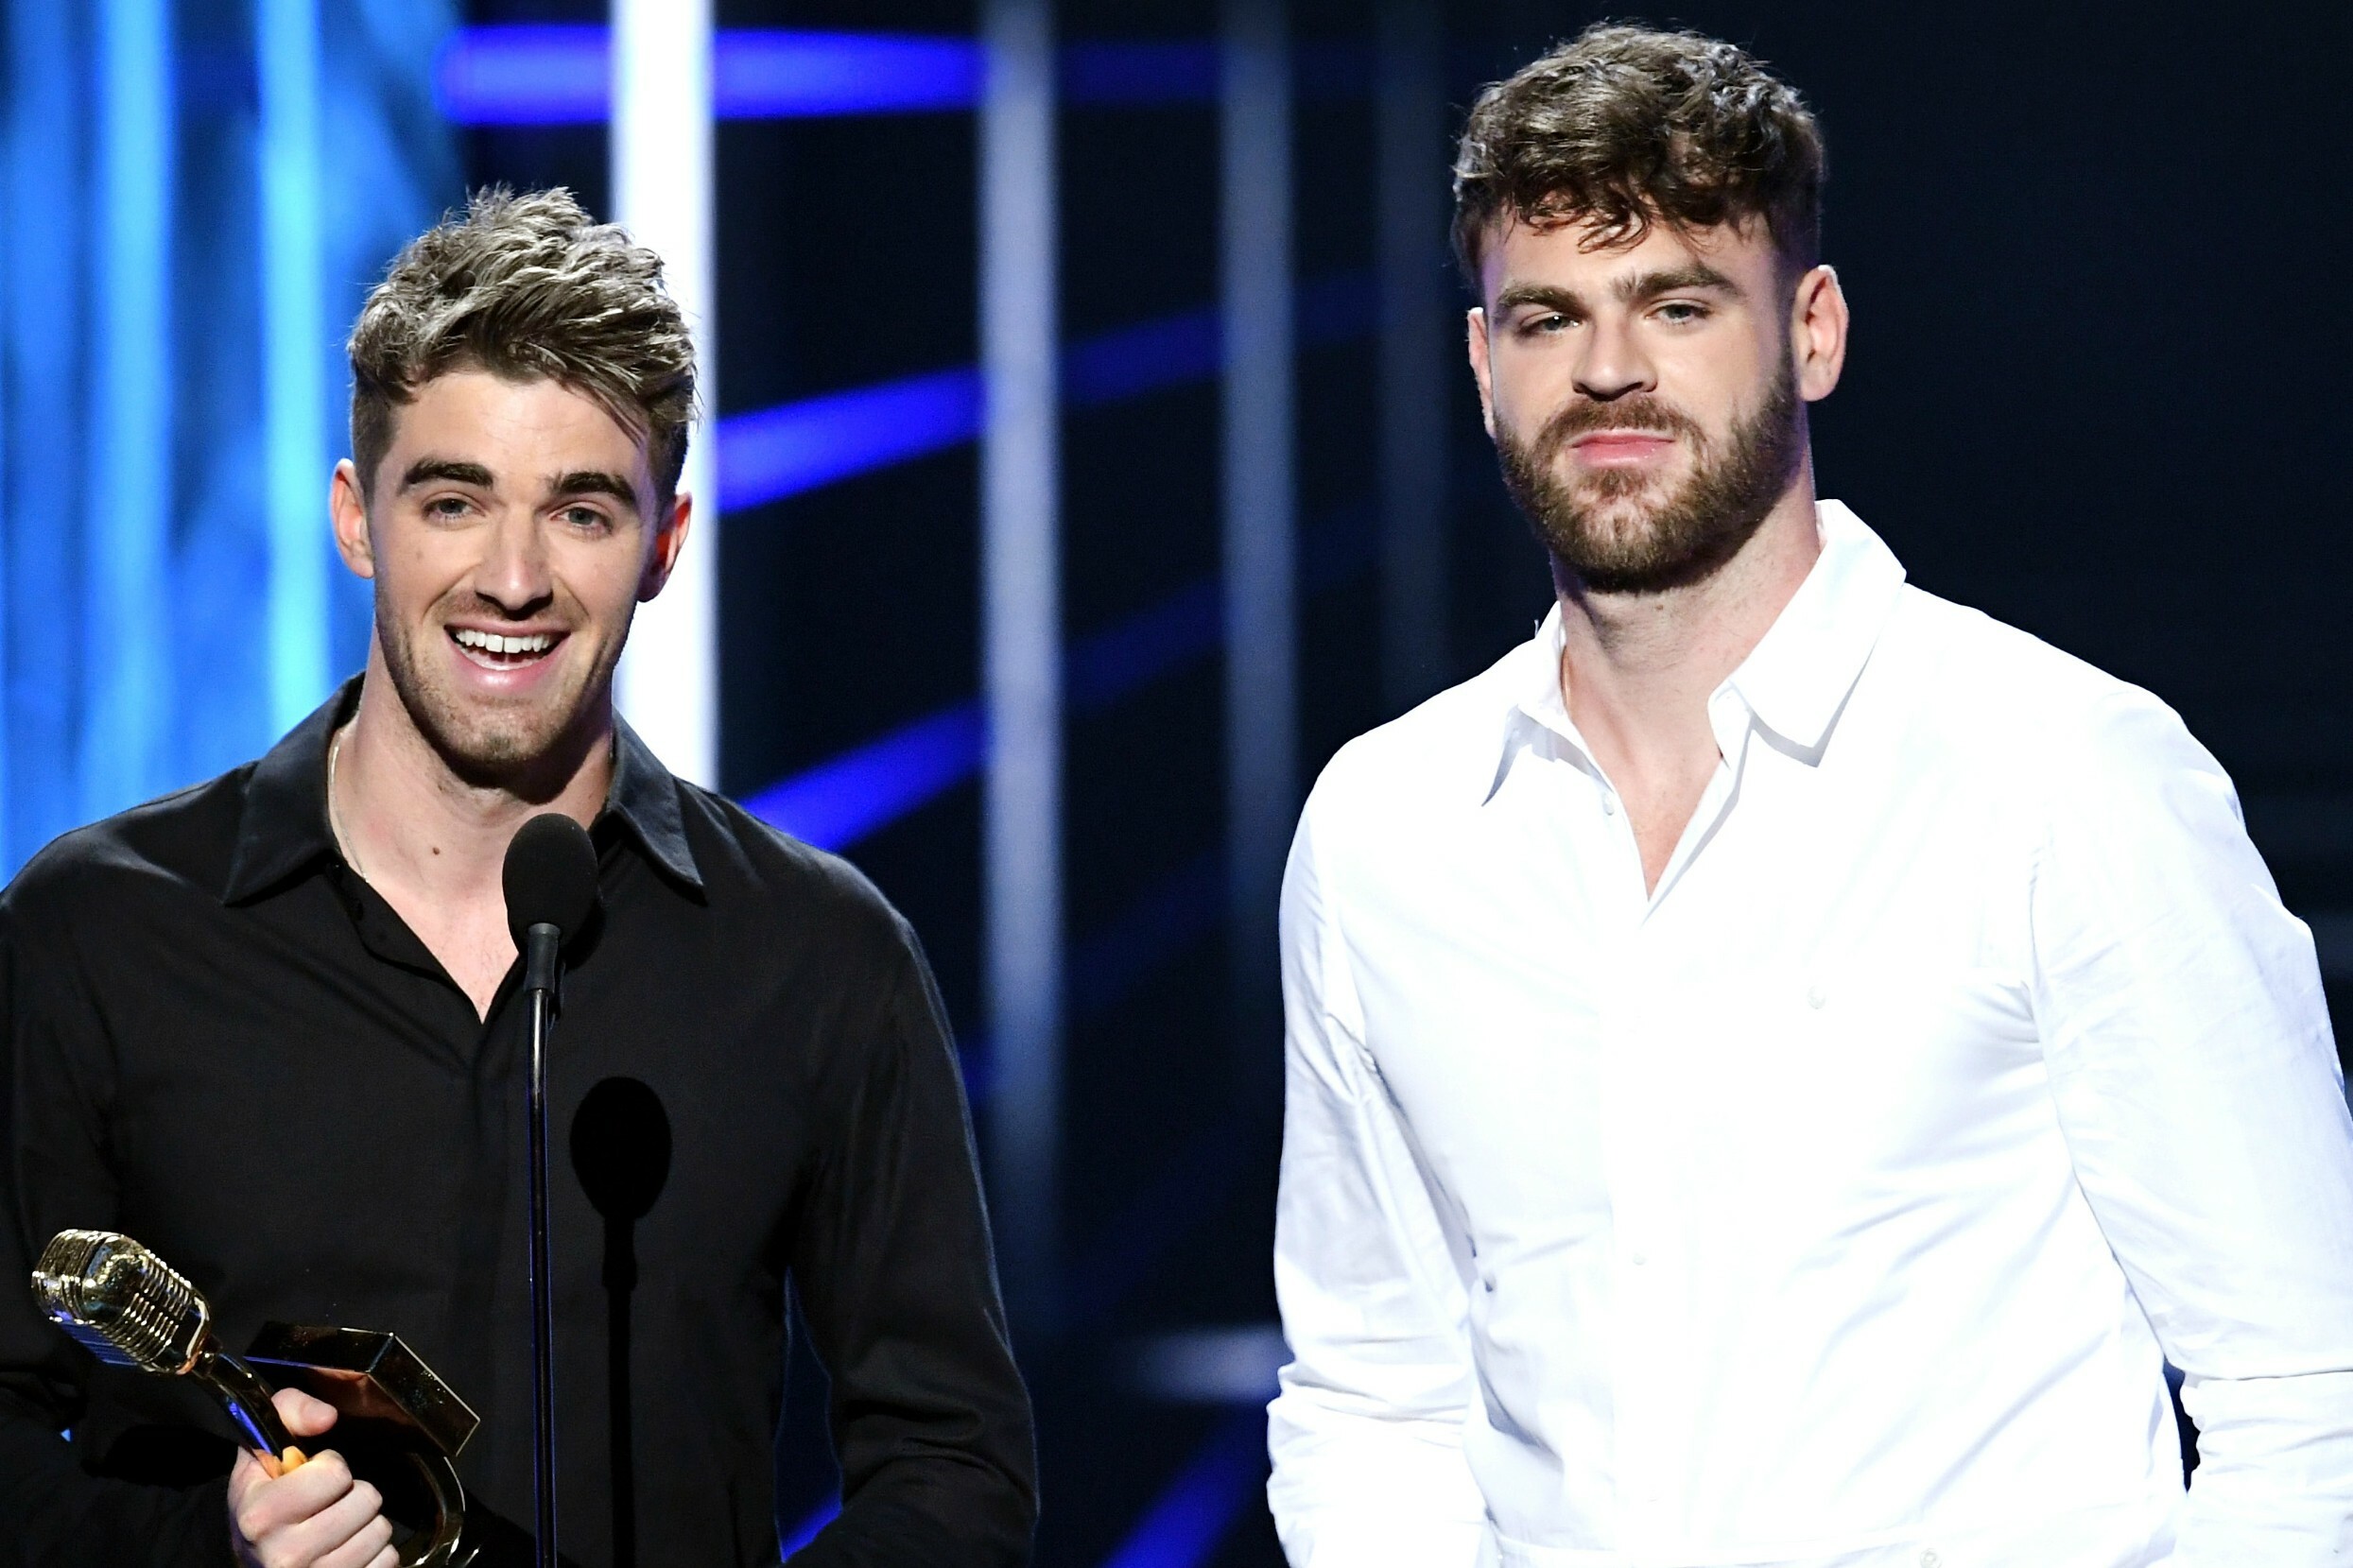 The Chainsmokers, Brand collaboration, Paid performance, Controversial partnership, 2490x1660 HD Desktop